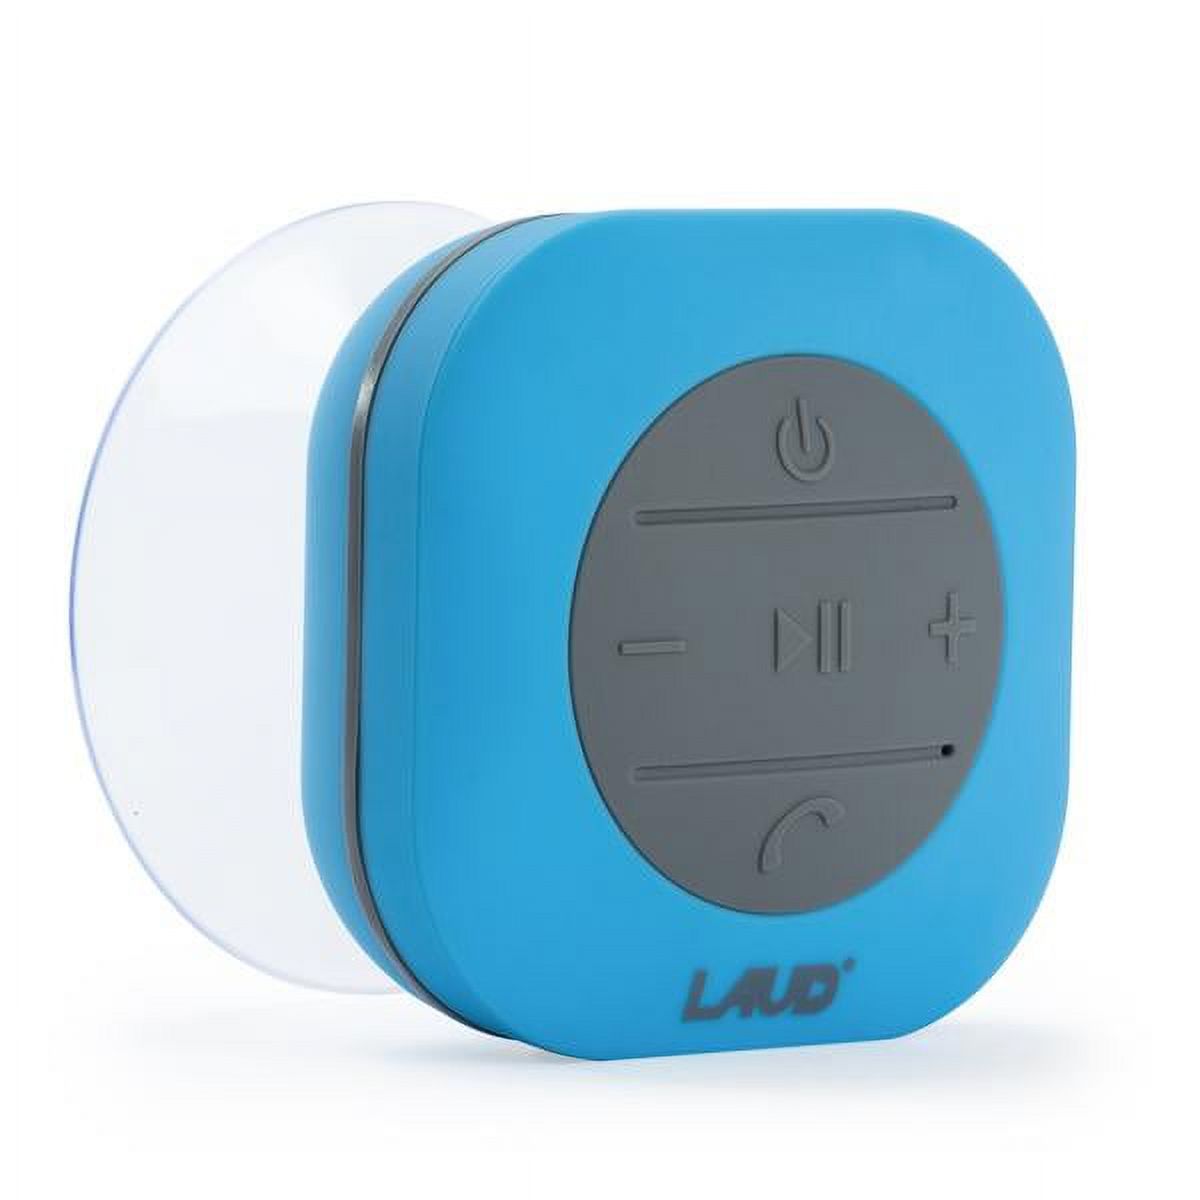 Laud Portable Wireless Shower Speaker ? IPX4 Waterproof ? Super Strong Suction Cup - Built-in Mic For Hands free Callinge - Water Resistant Rubber Coating - image 1 of 6